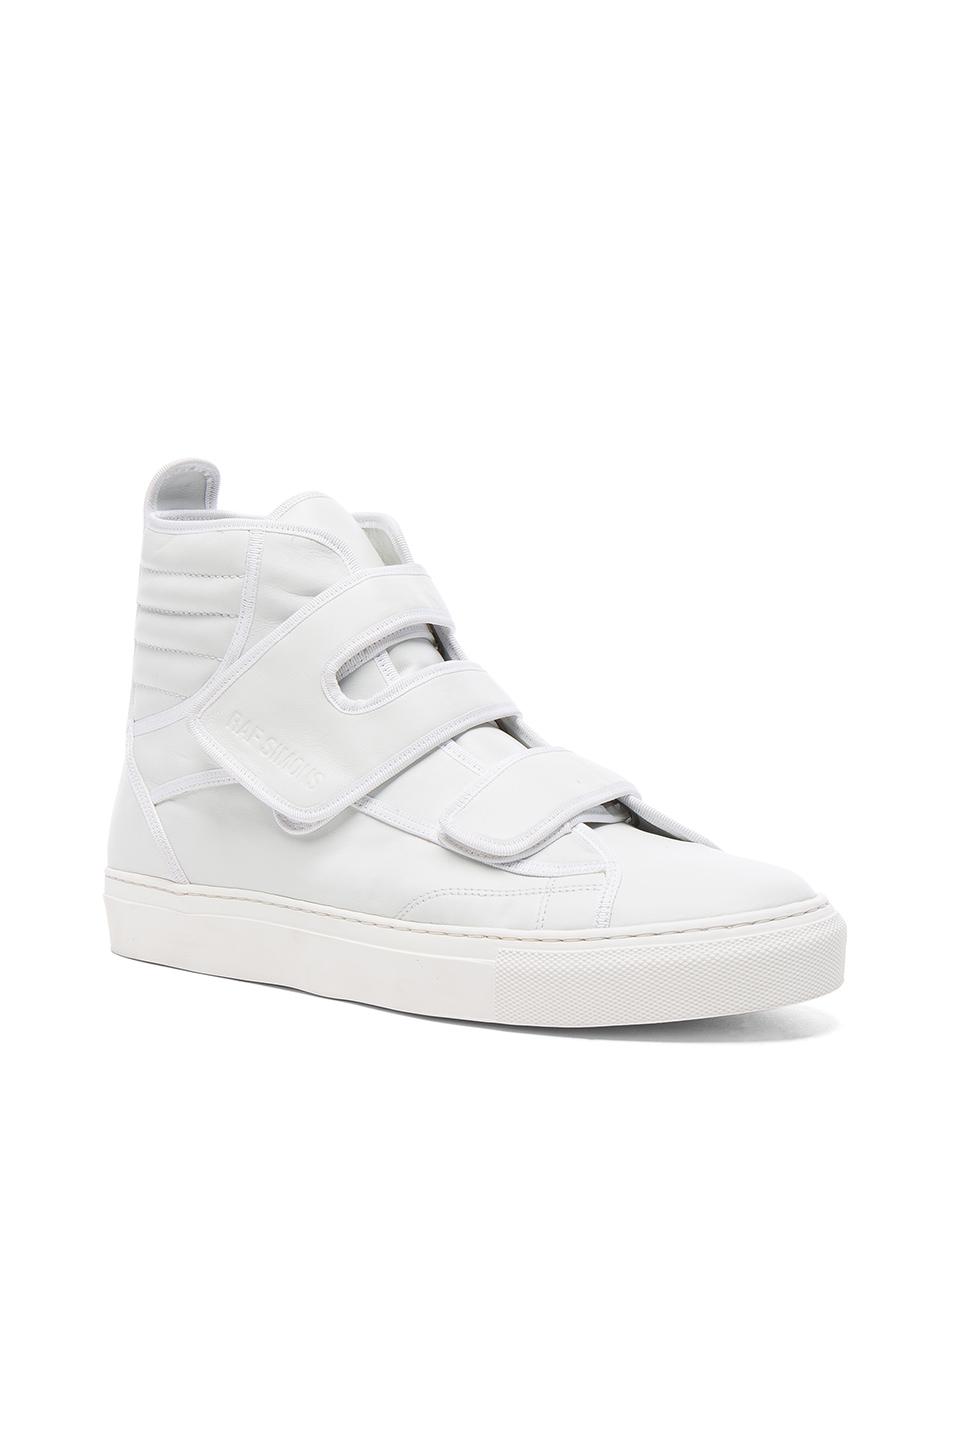 Pompeji ting Bageri Raf Simons High Top Velcro Sneakers in White | Lyst